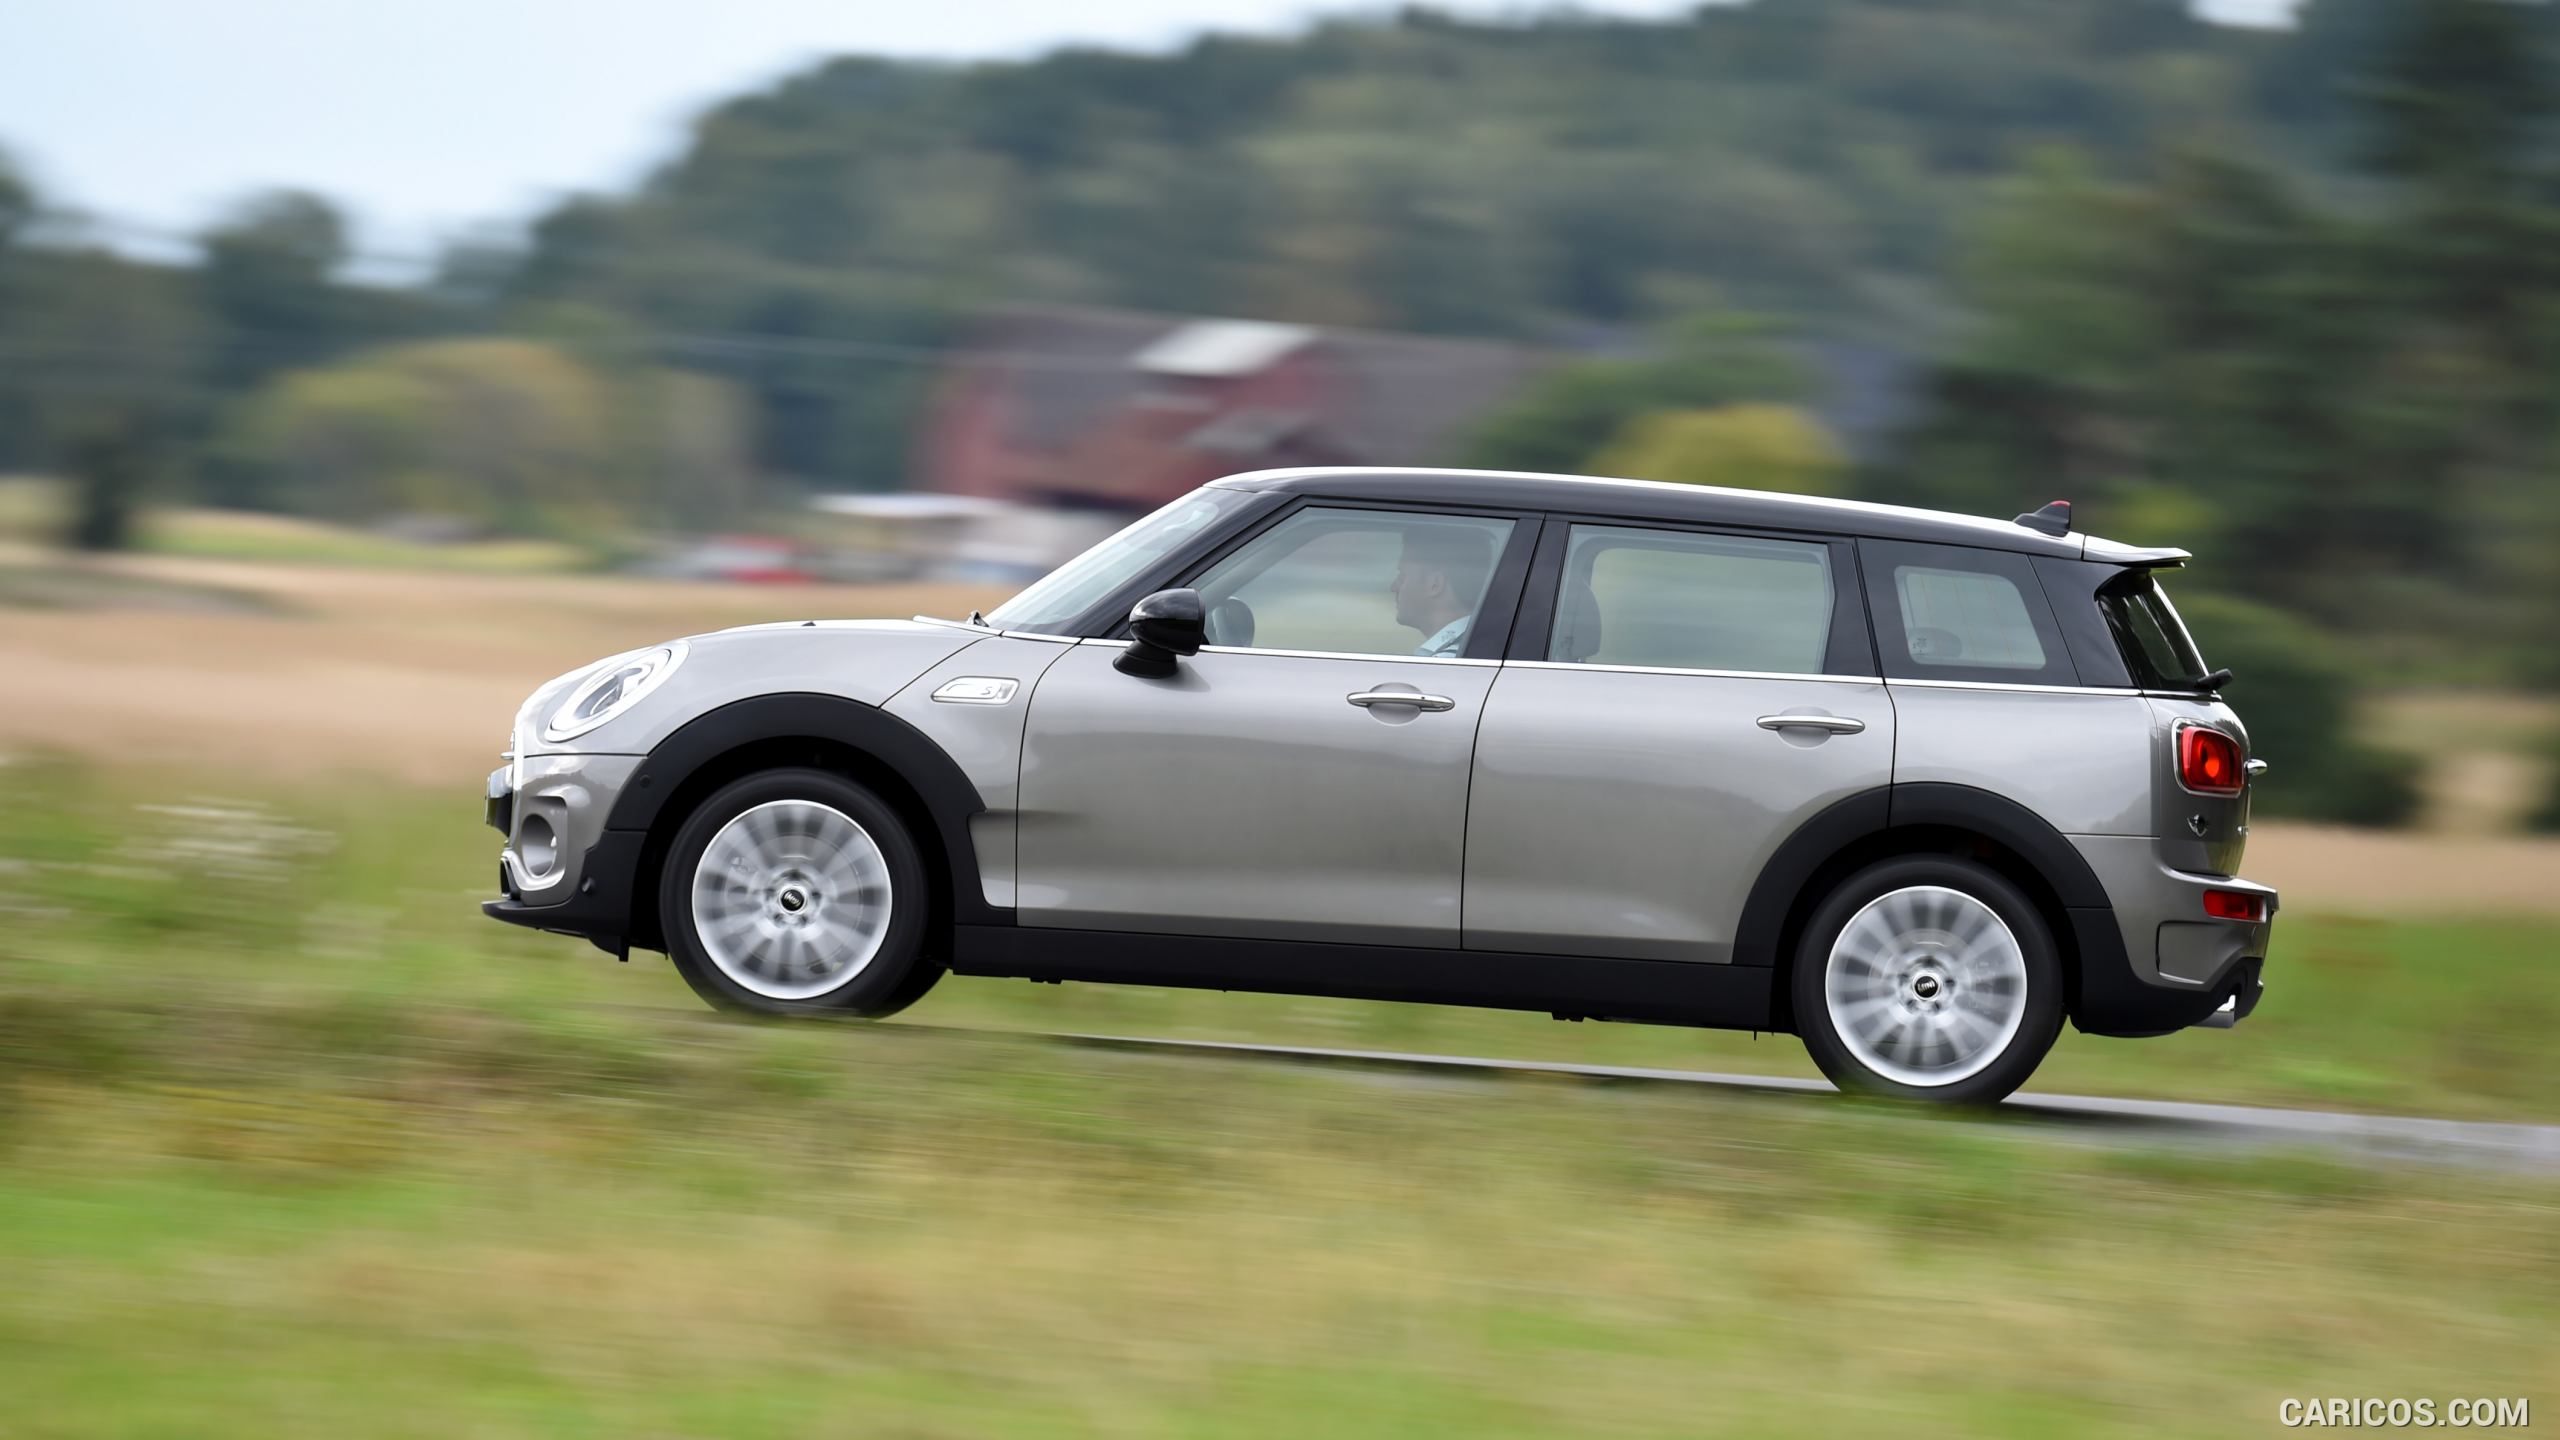 2016 MINI Cooper S Clubman in Metallic Melting Silver - Side, #150 of 380